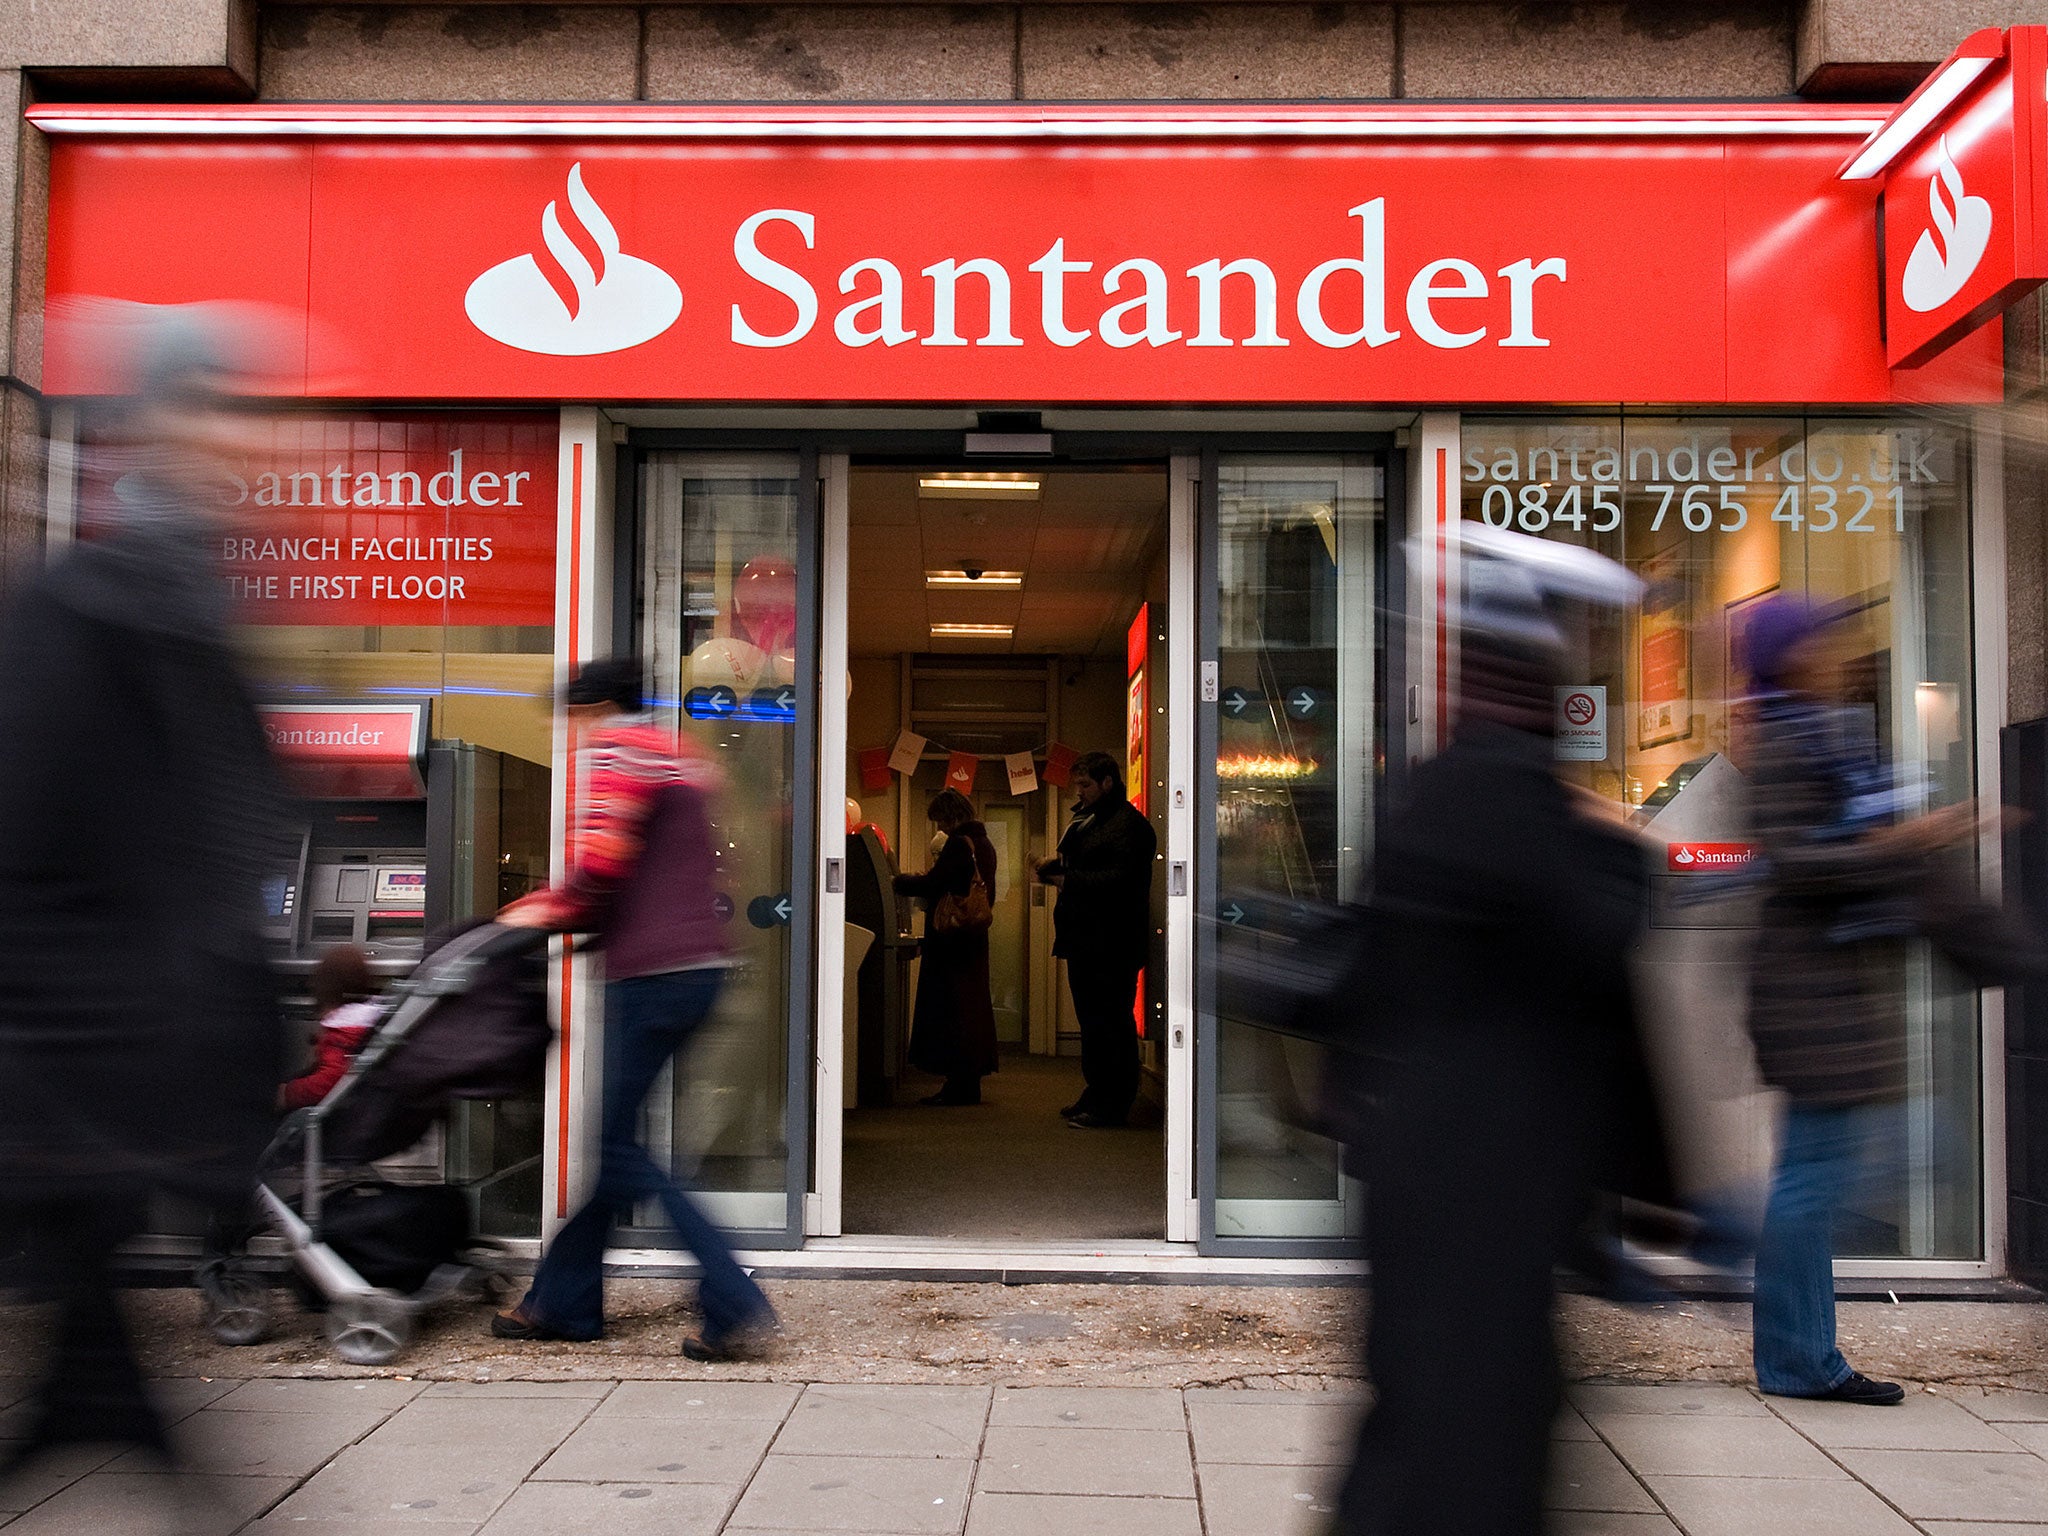 Santander has a current account that pays 3 per cent on balances from £3,000 to £20,000, with instant access